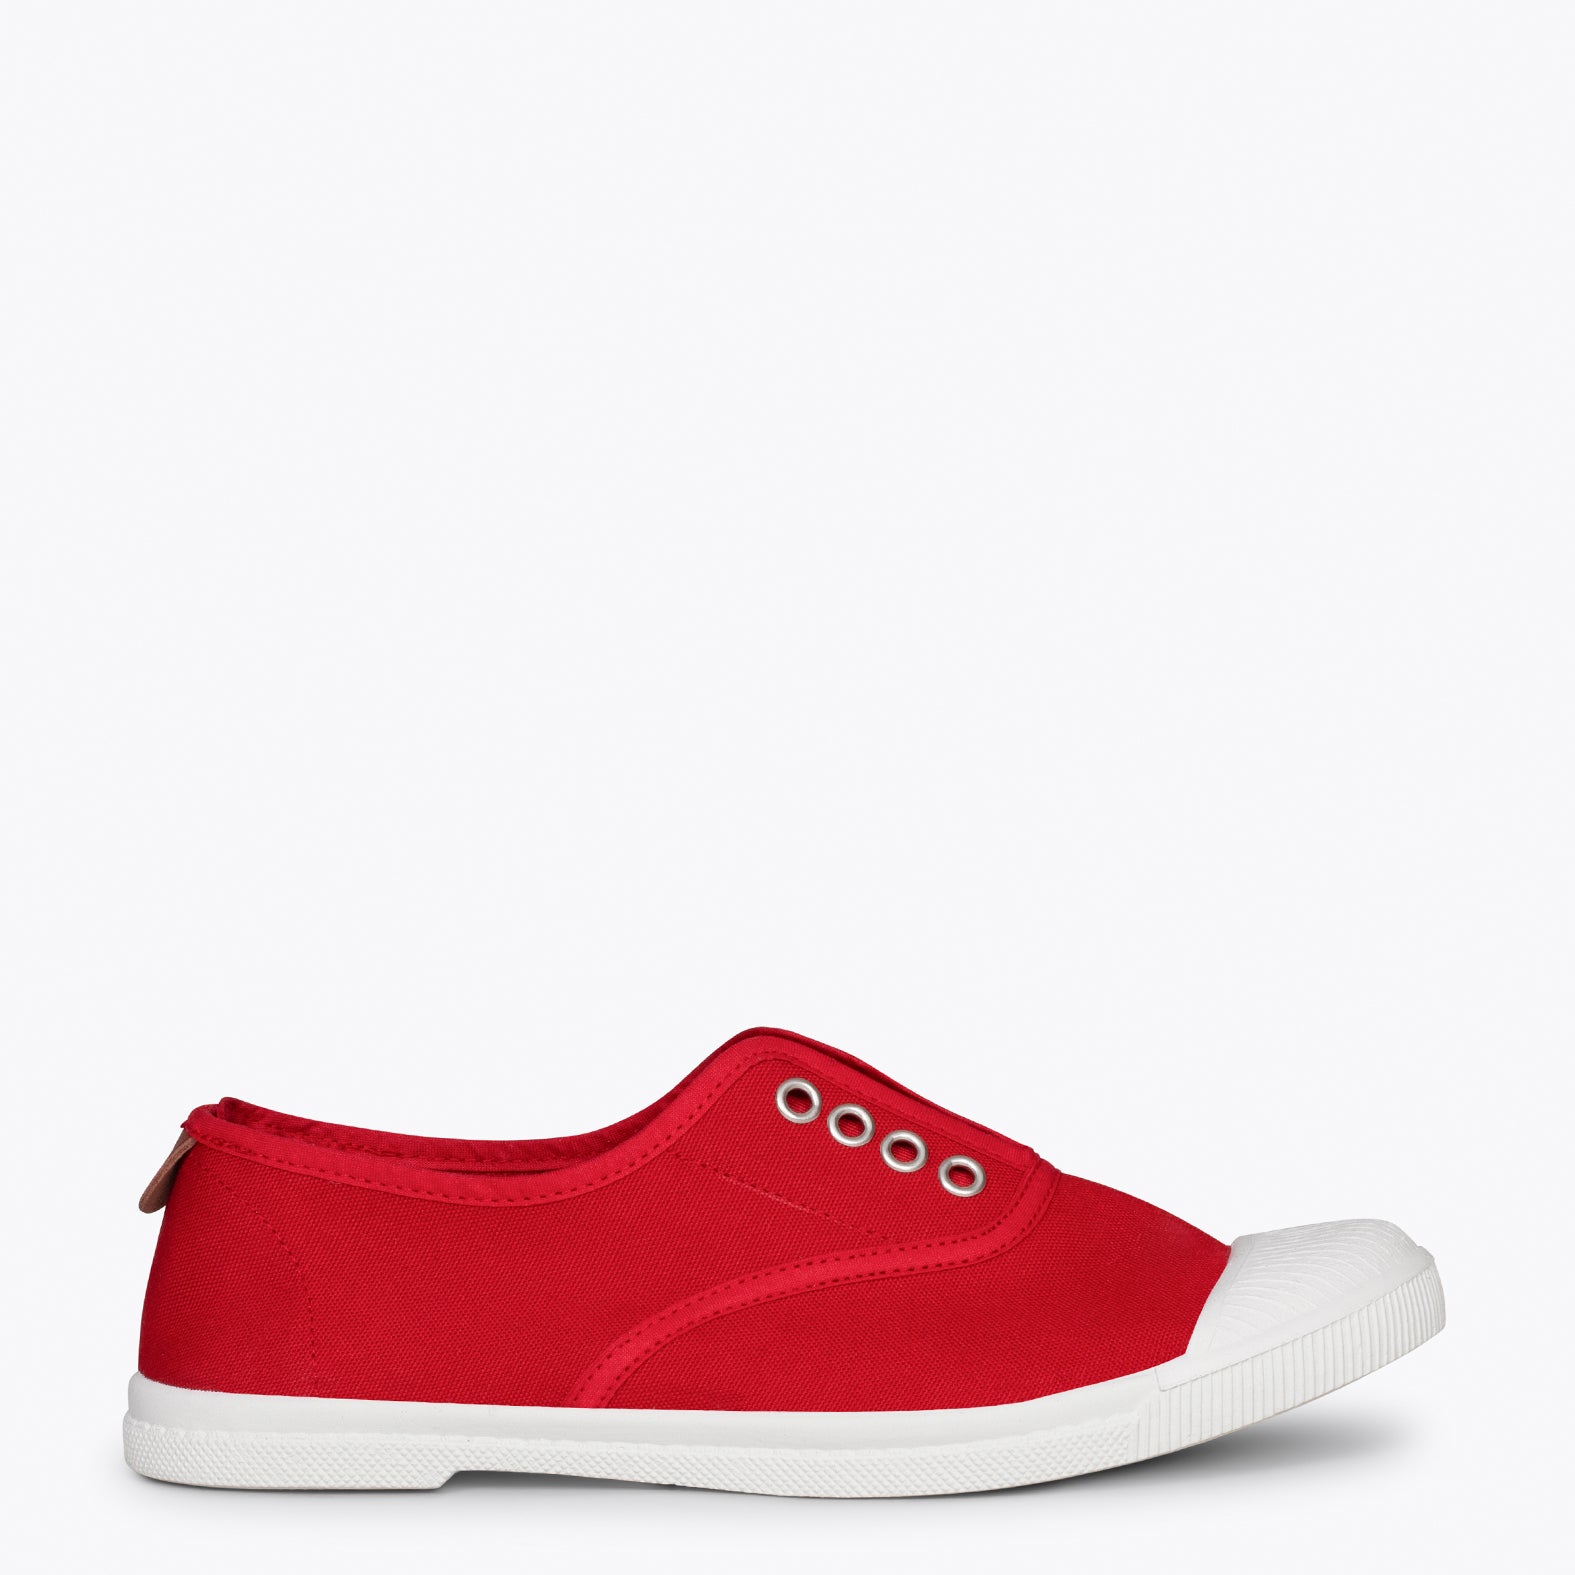 WAY – RED sneakers with elastic